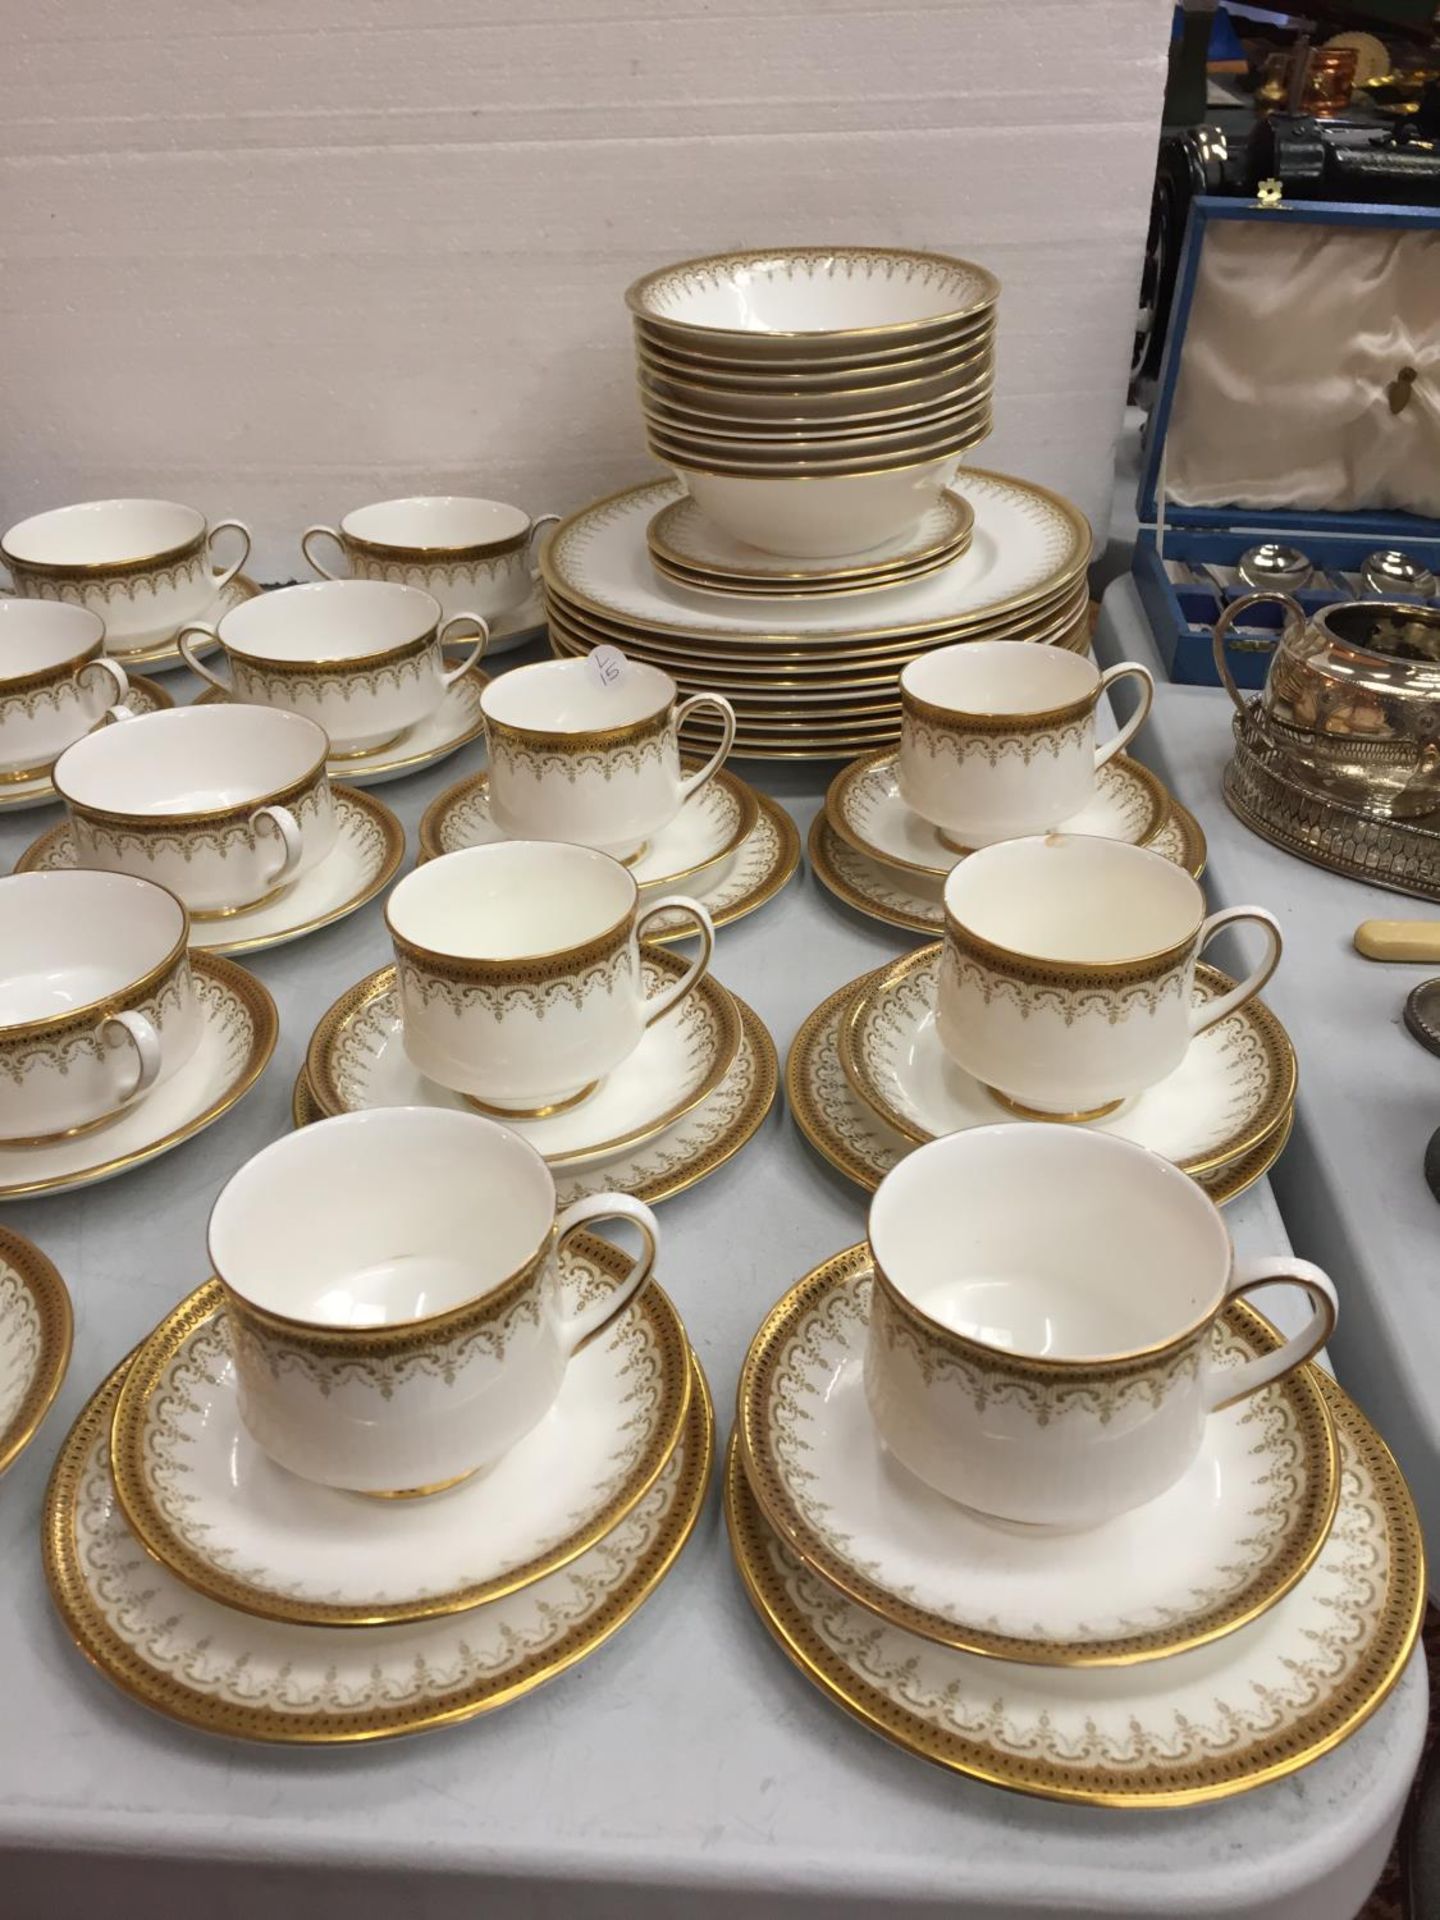 A COLLECTION OF ROYAL ALBERT " ATHENA DESIGN"BONE CHINA DINNER SERVICE TO INCLUDE SIX TEA CUPS AND - Image 2 of 5